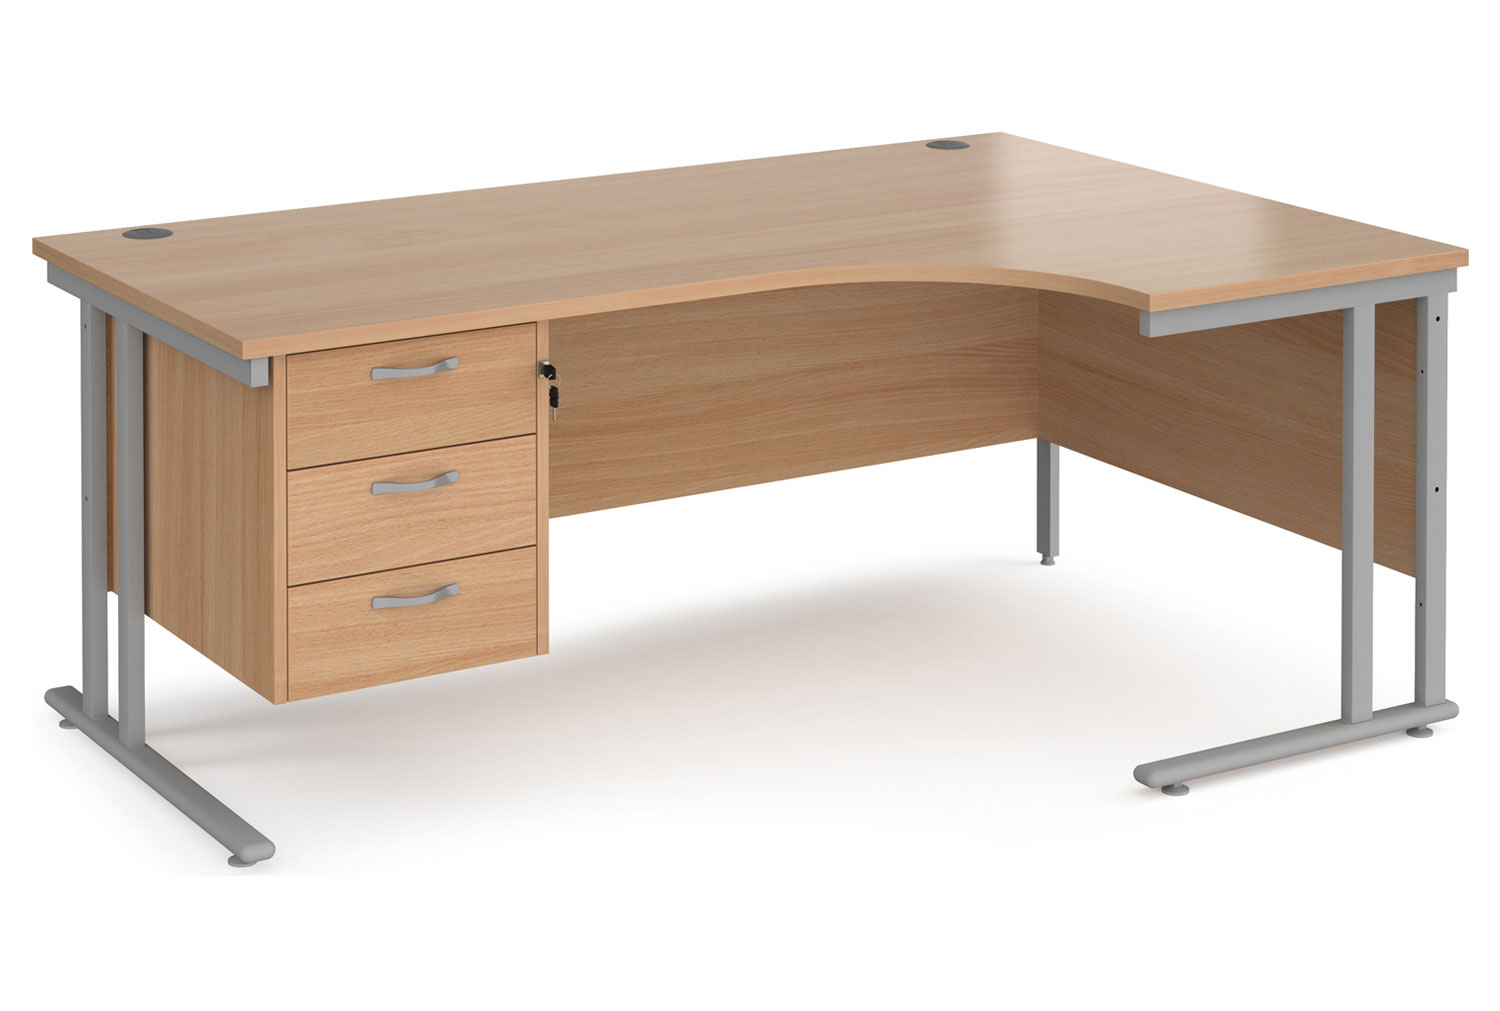 Value Line Deluxe C-Leg Right Hand Ergonomic Office Desk 3 Drawers (Silver Legs), 180wx120/80dx73h (cm), Beech, Express Delivery